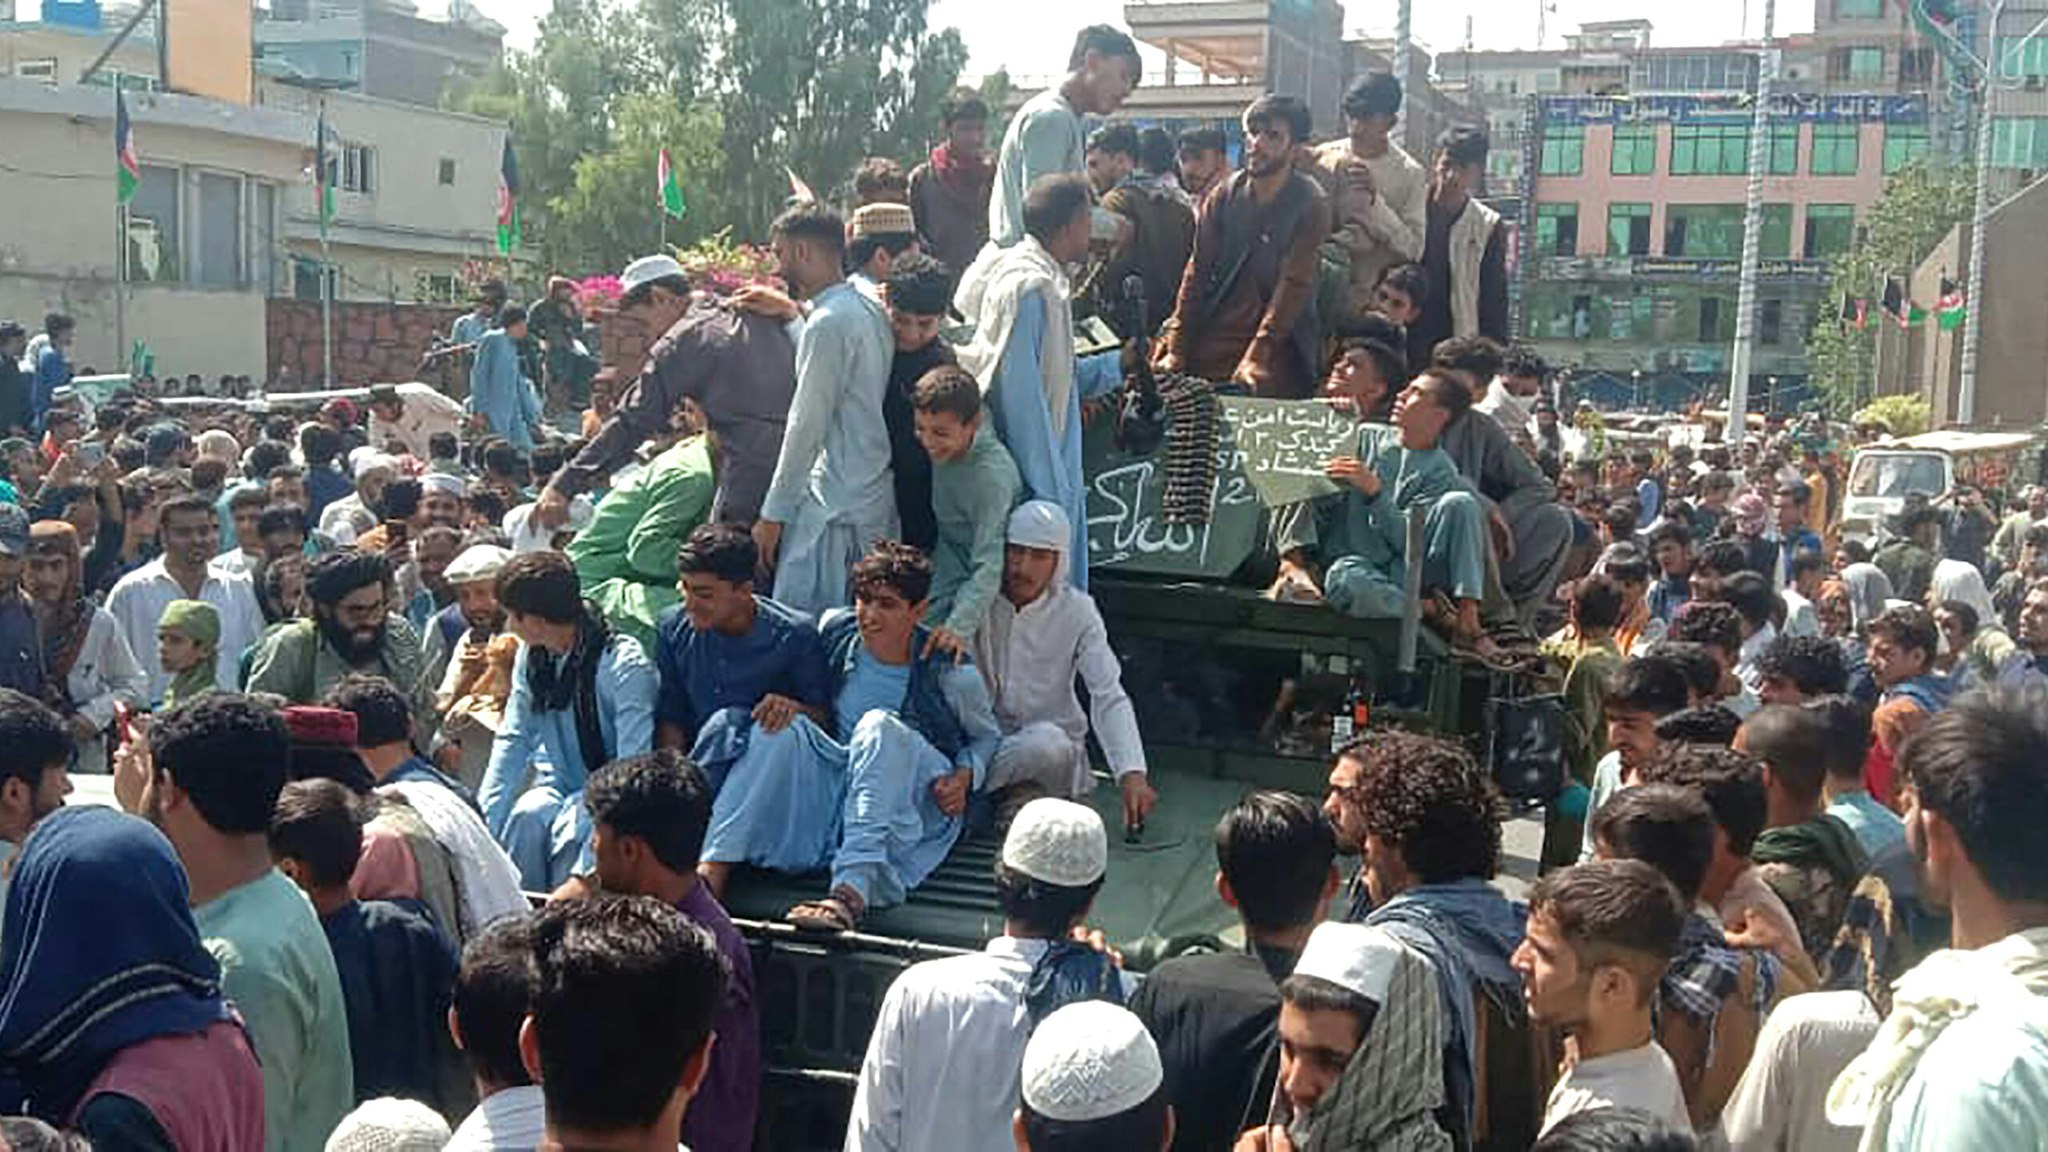 TOPSHOT - Taliban fighters and local people sit on an Afghan National Army (ANA) Humvee vehicle on a street in Jalalabad province on August 15, 2021.